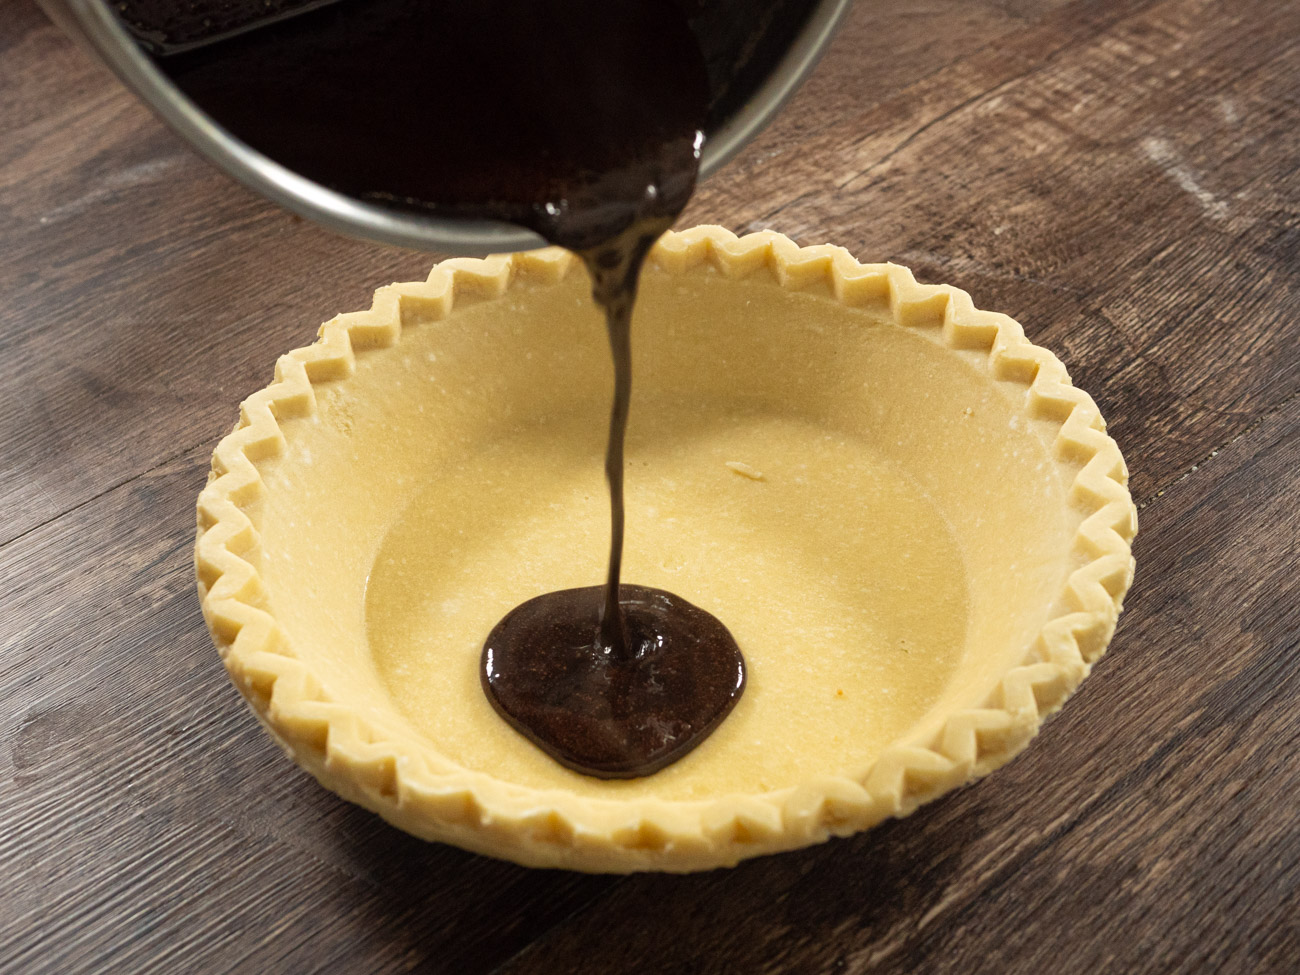 Pour cocoa mixture into unbaked pastry shell and turn pie so that chocolate mix comes up the sides halfway. Set aside.